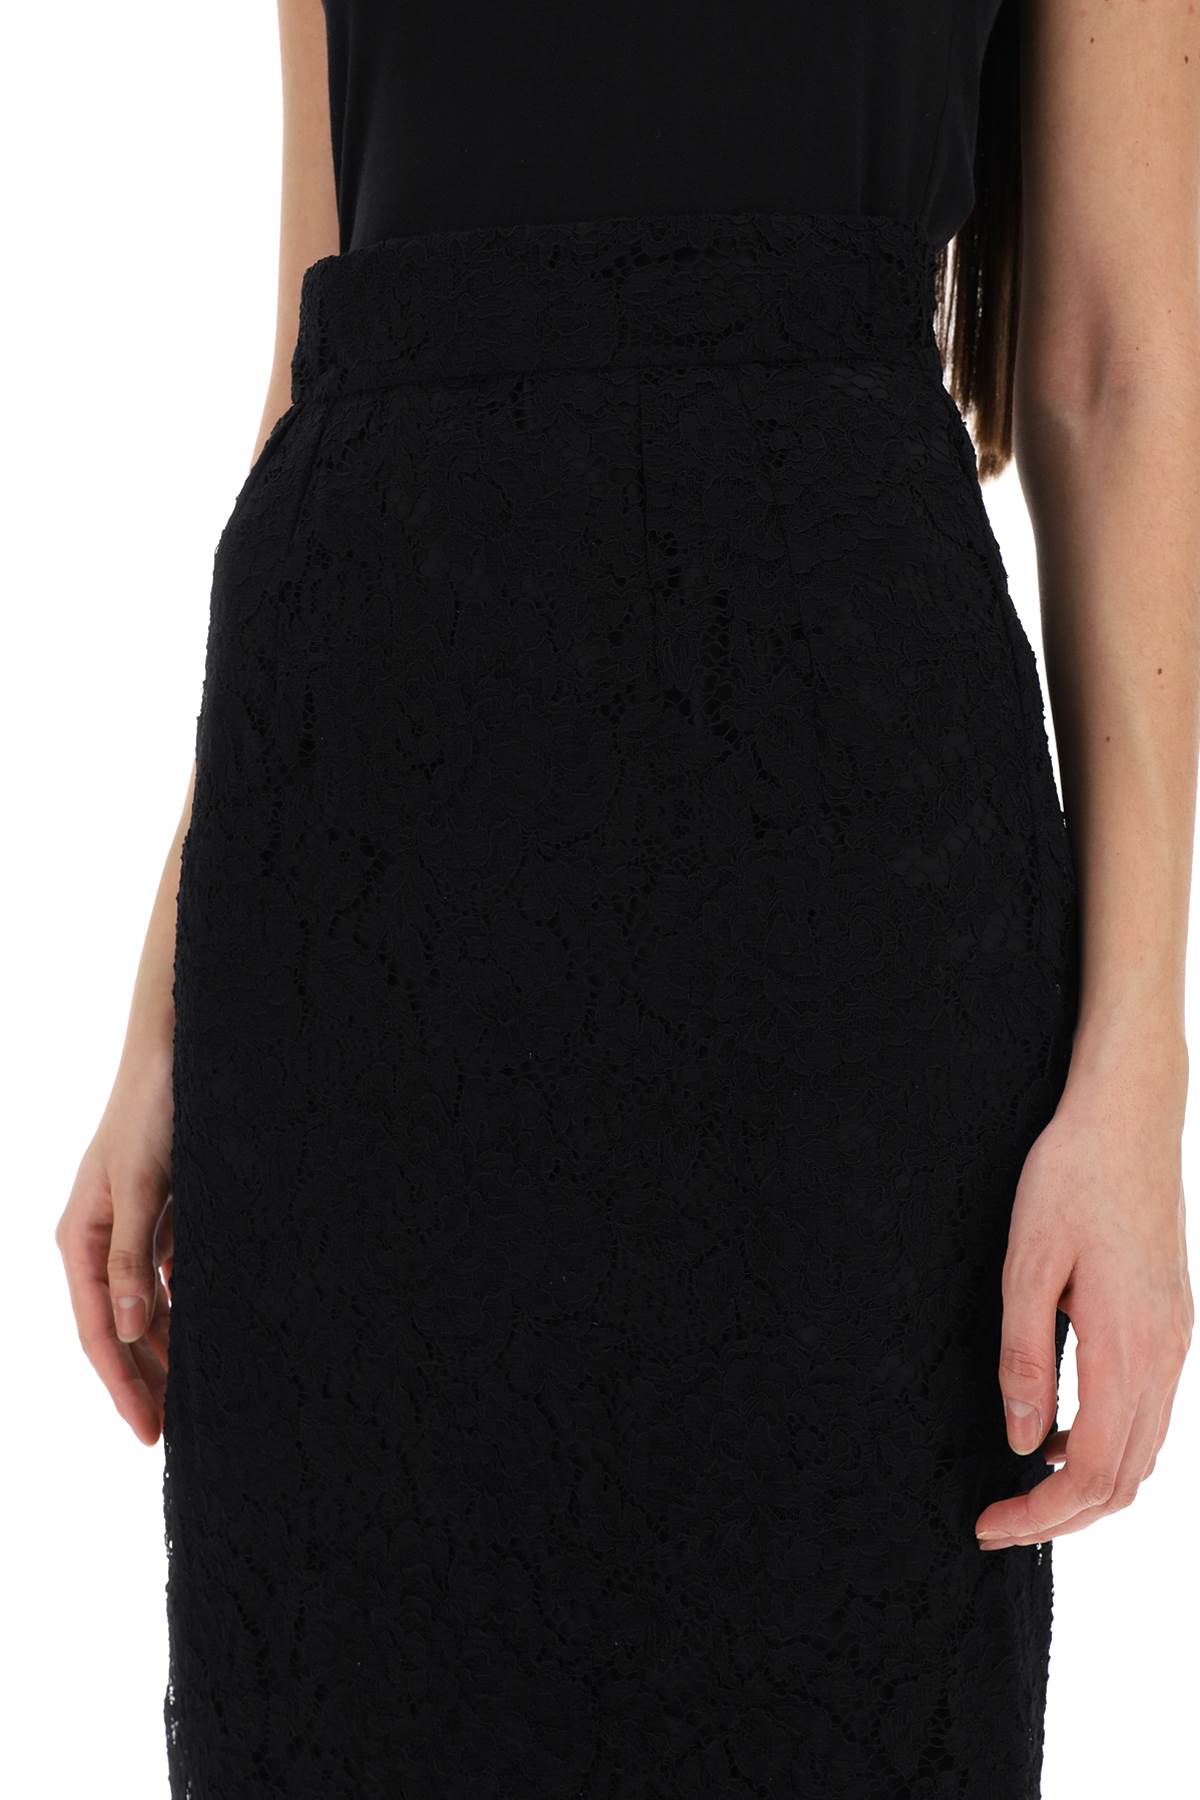 Dolce & gabbana lace pencil skirt with tube silhouette-3